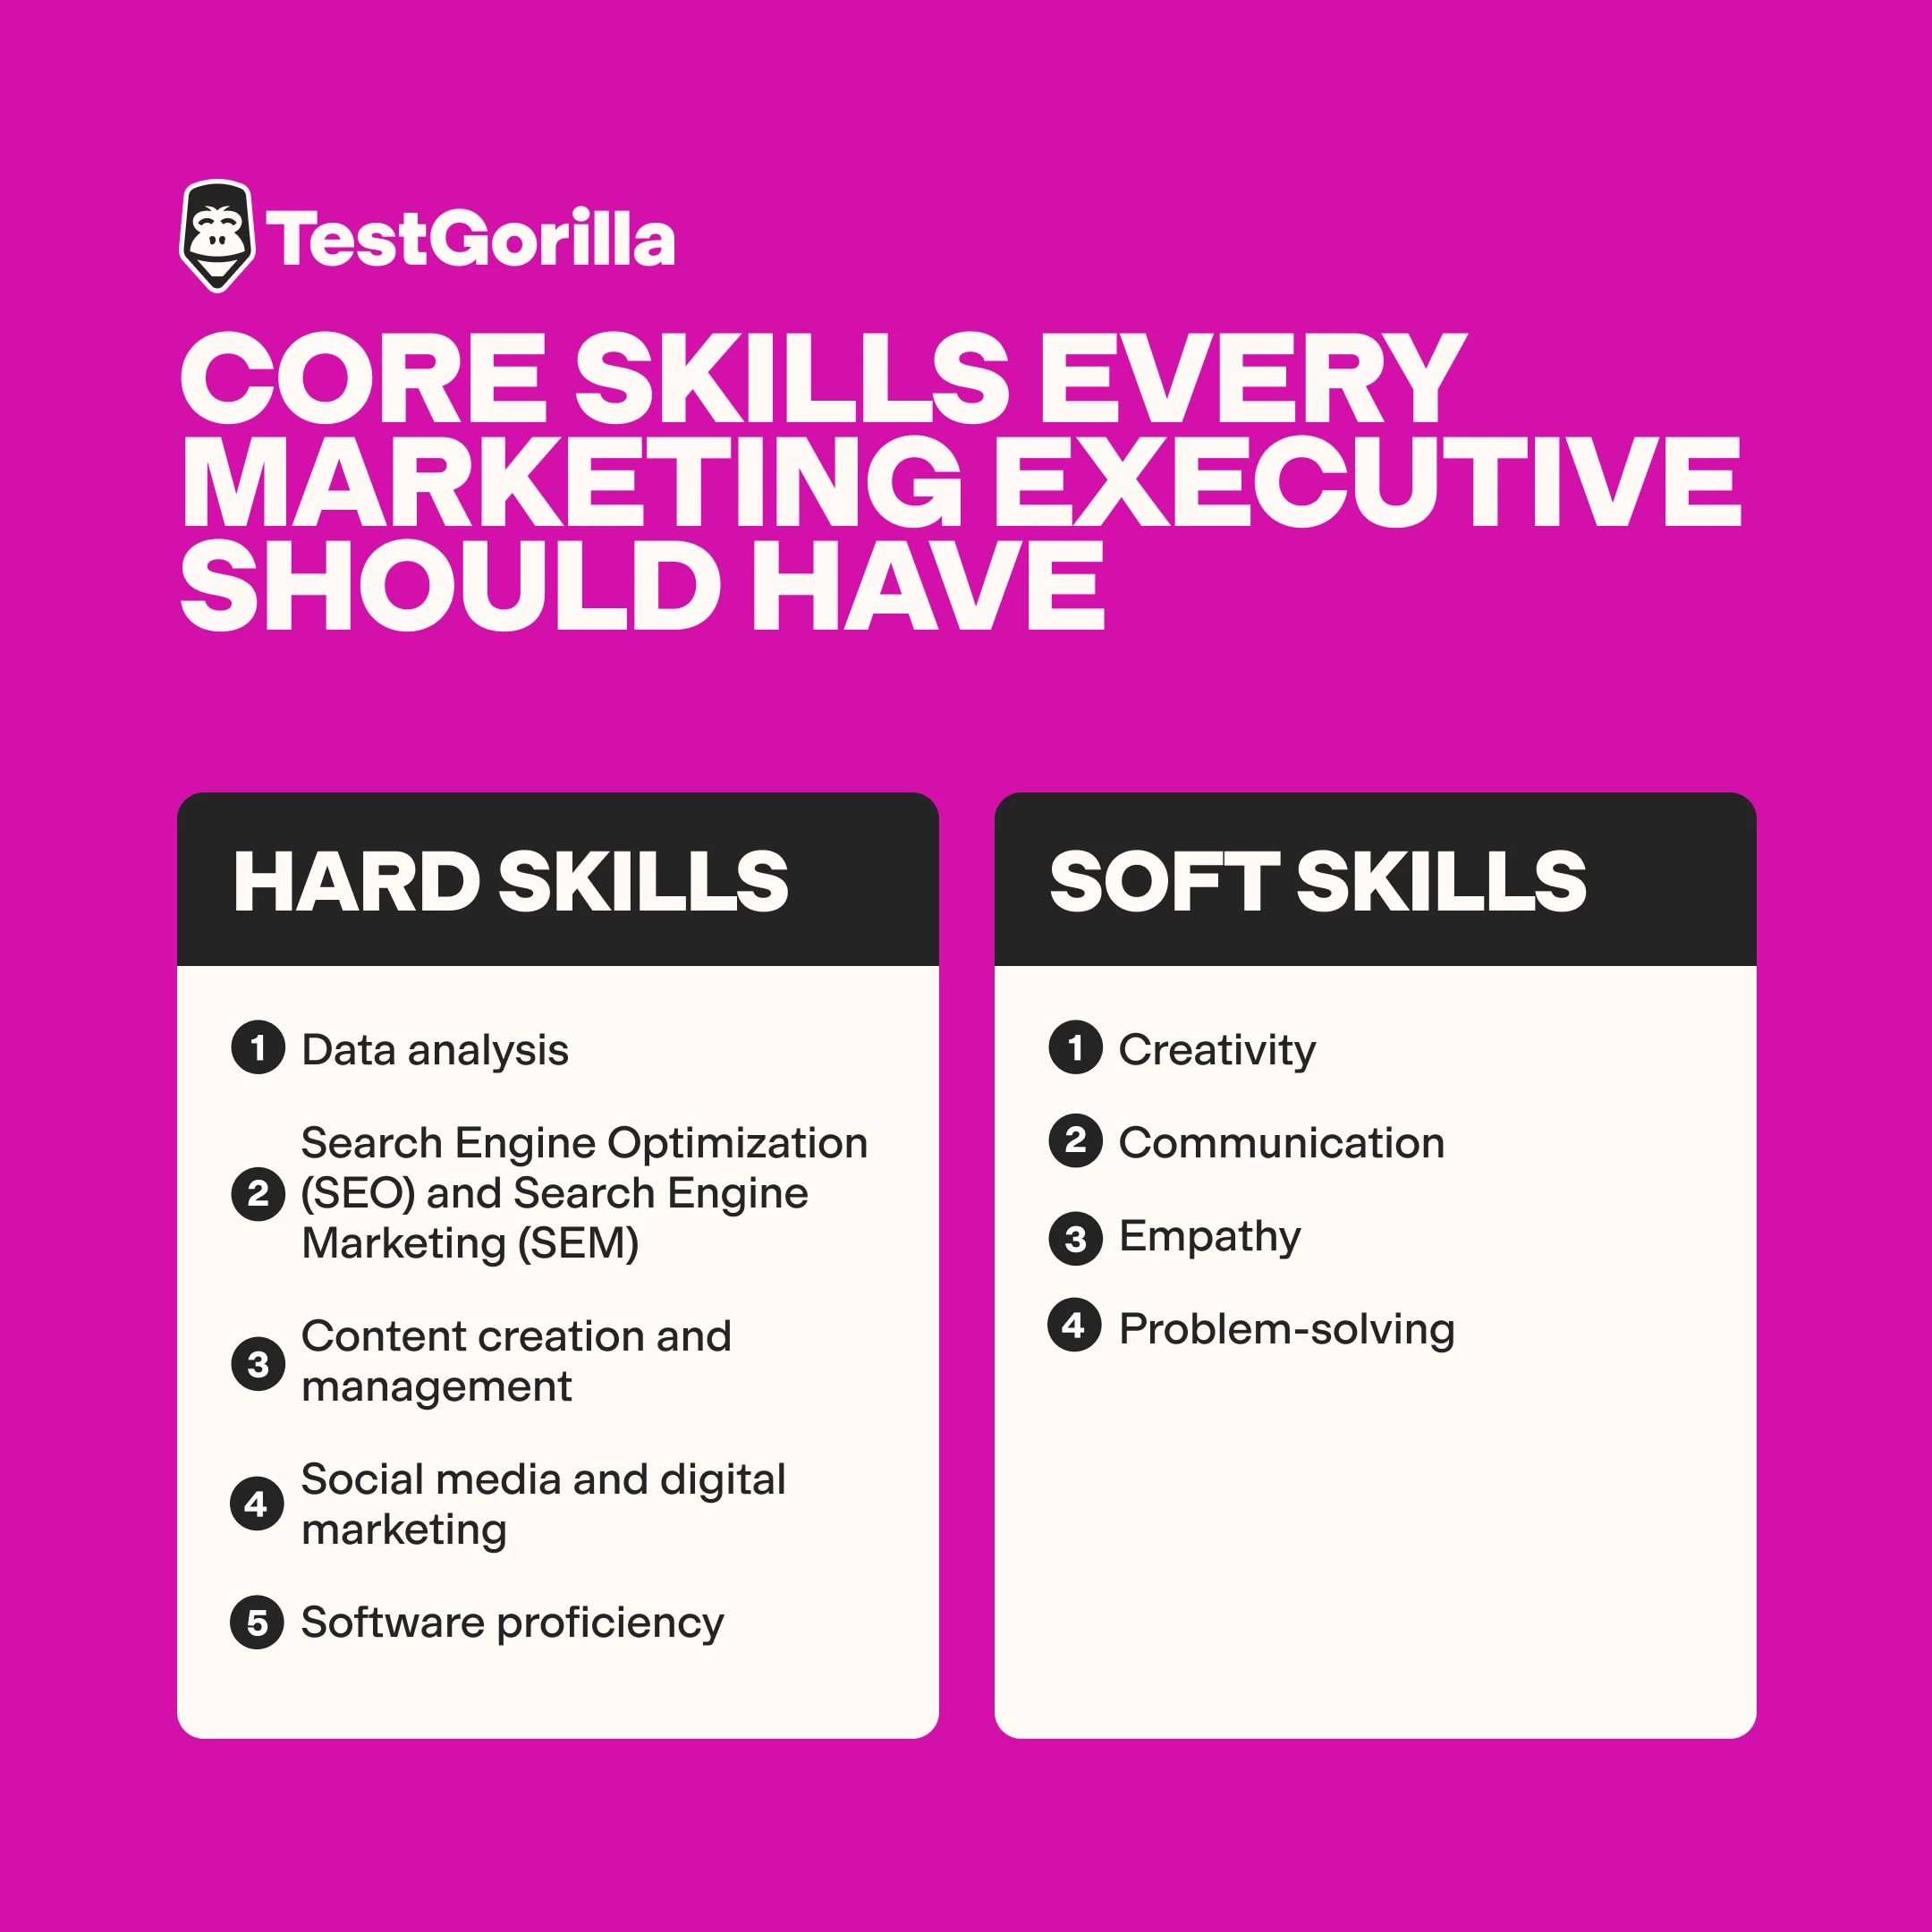 Core skills every marketing executive should have graphic